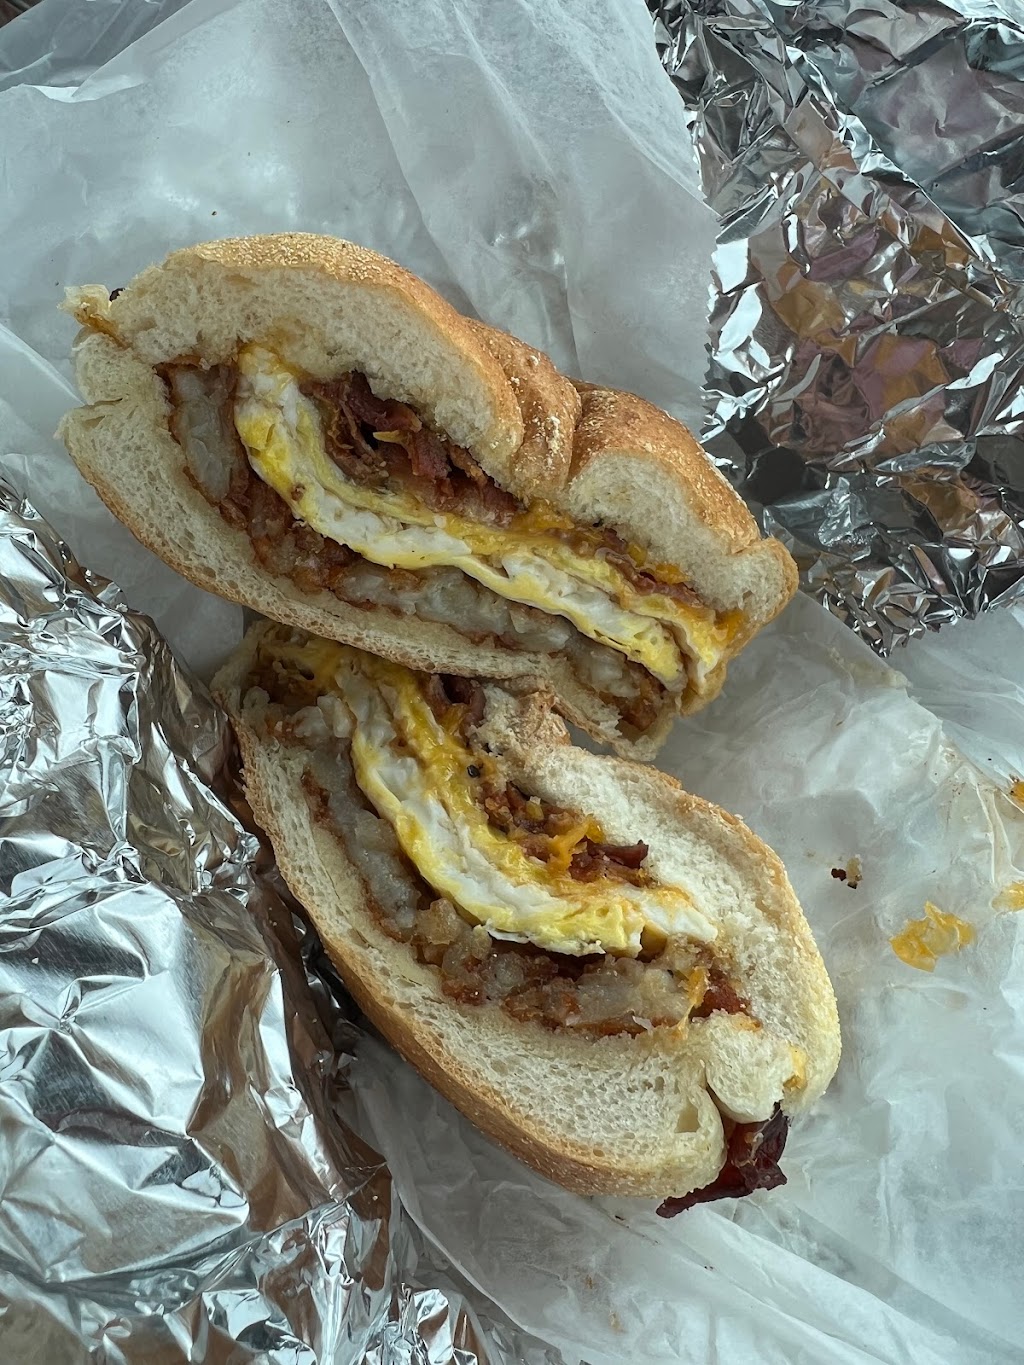 In & Out Deli & Catering | 91 New Hackensack Rd, Wappingers Falls, NY 12590 | Phone: (845) 297-6479